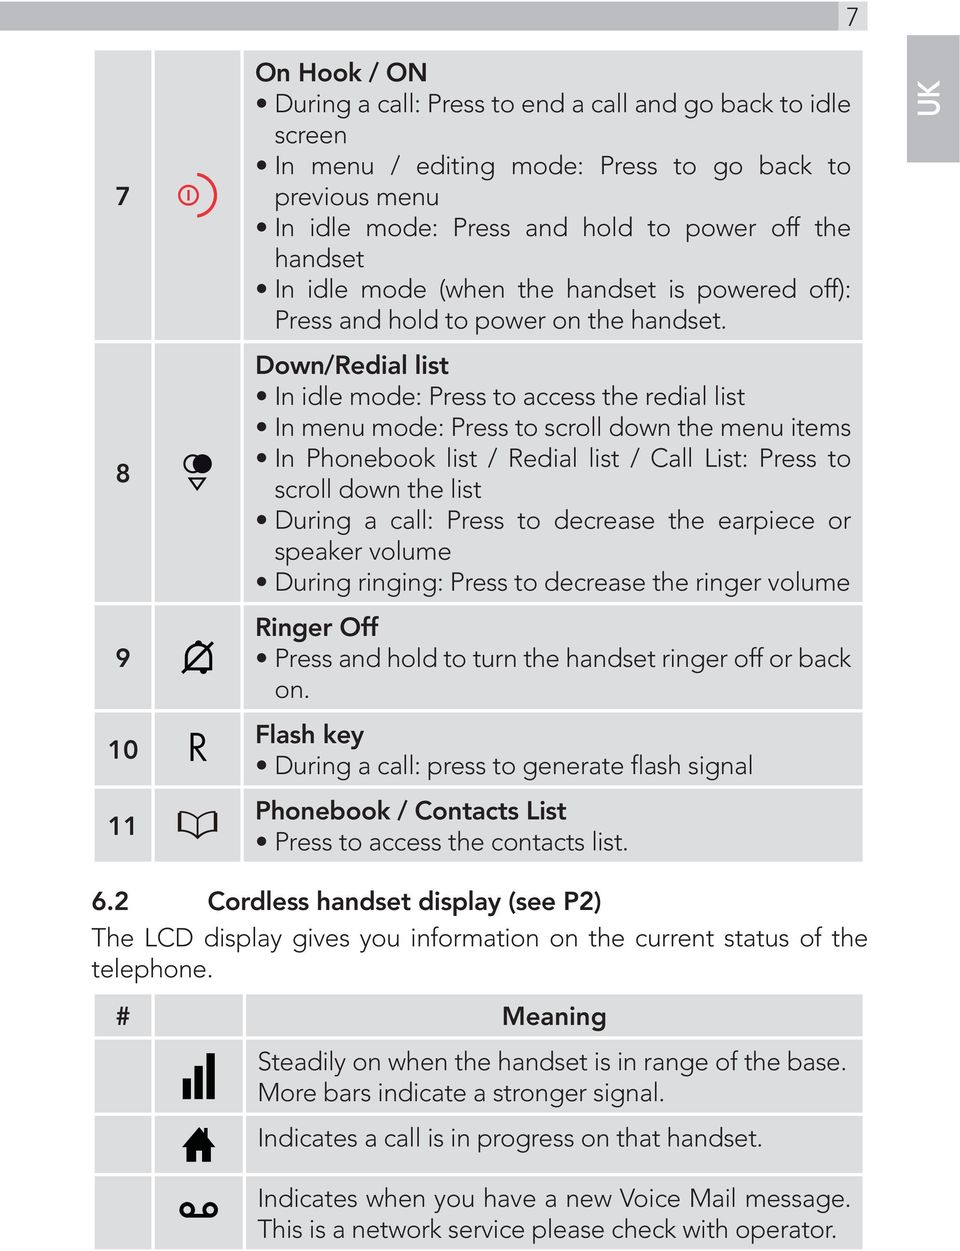 Down/Redial list In idle mode: Press to access the redial list In menu mode: Press to scroll down the menu items In Phonebook list / Redial list / Call List: Press to scroll down the list During a